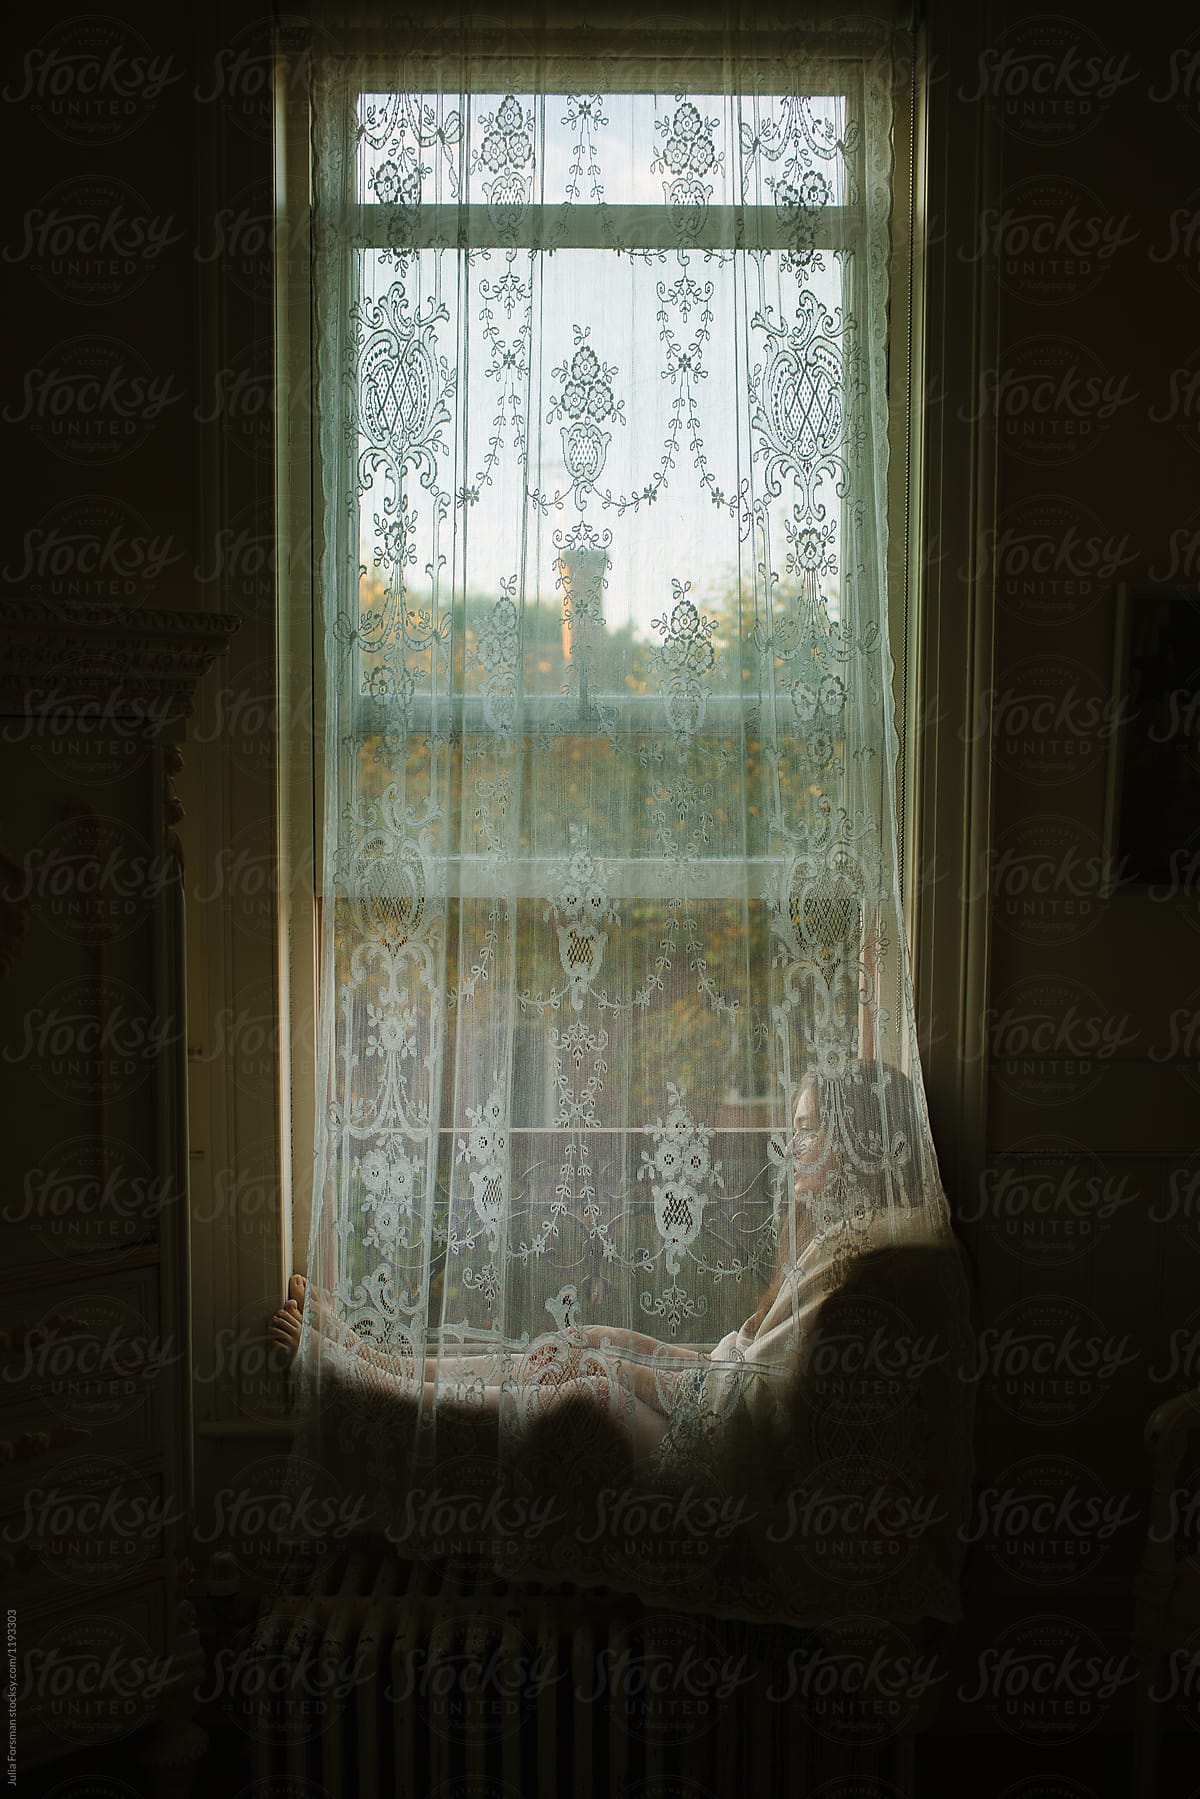 Woman sits behind a lace curtain at a window lost in her own thoughts.